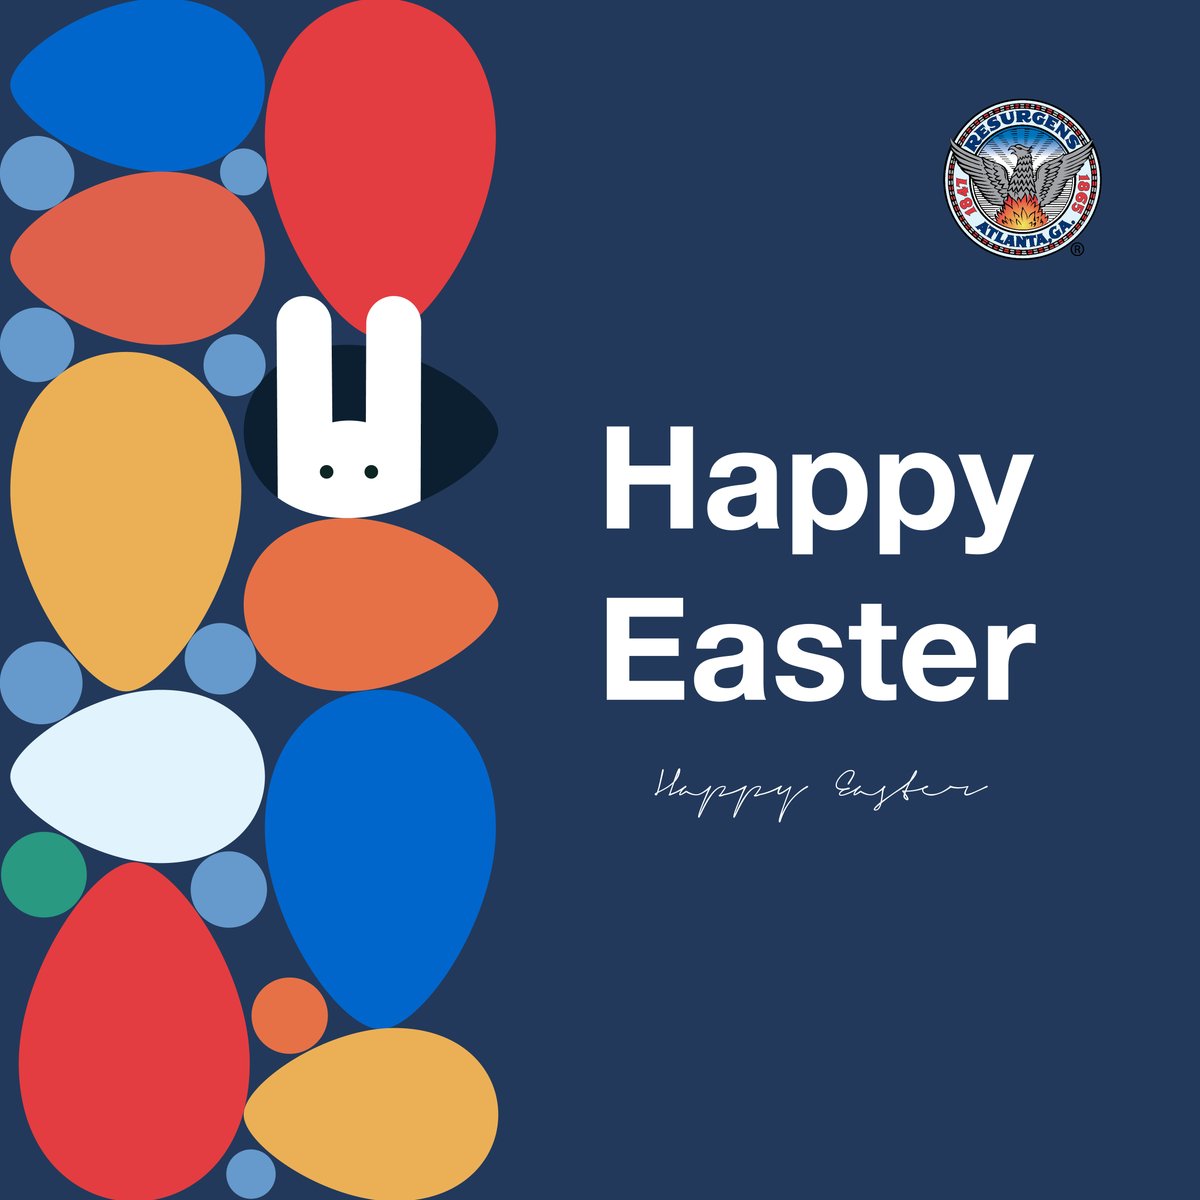 Spring has sprung, and we're hopping with joy! Happy Easter, Atlanta! Graphic by: Antonia Hull, City of Atlanta, Office of the Mayor